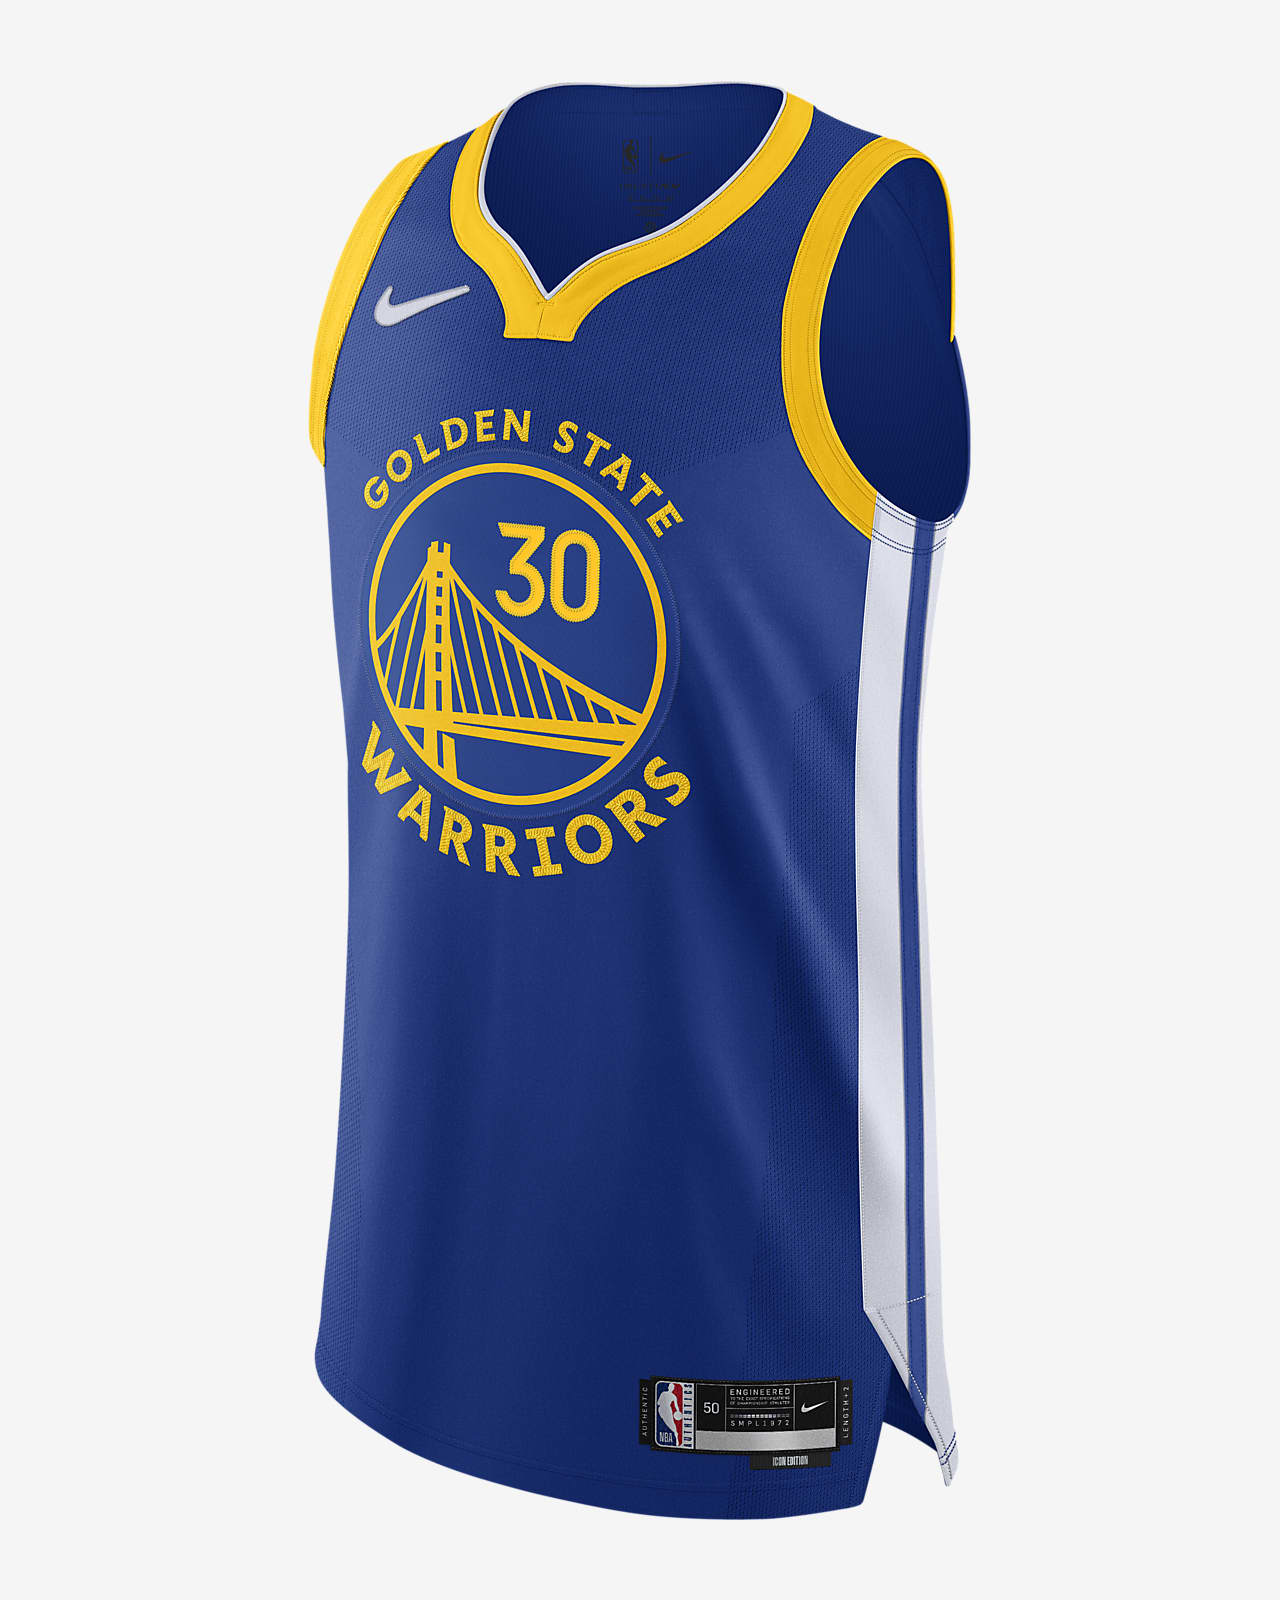 curry authentic jersey